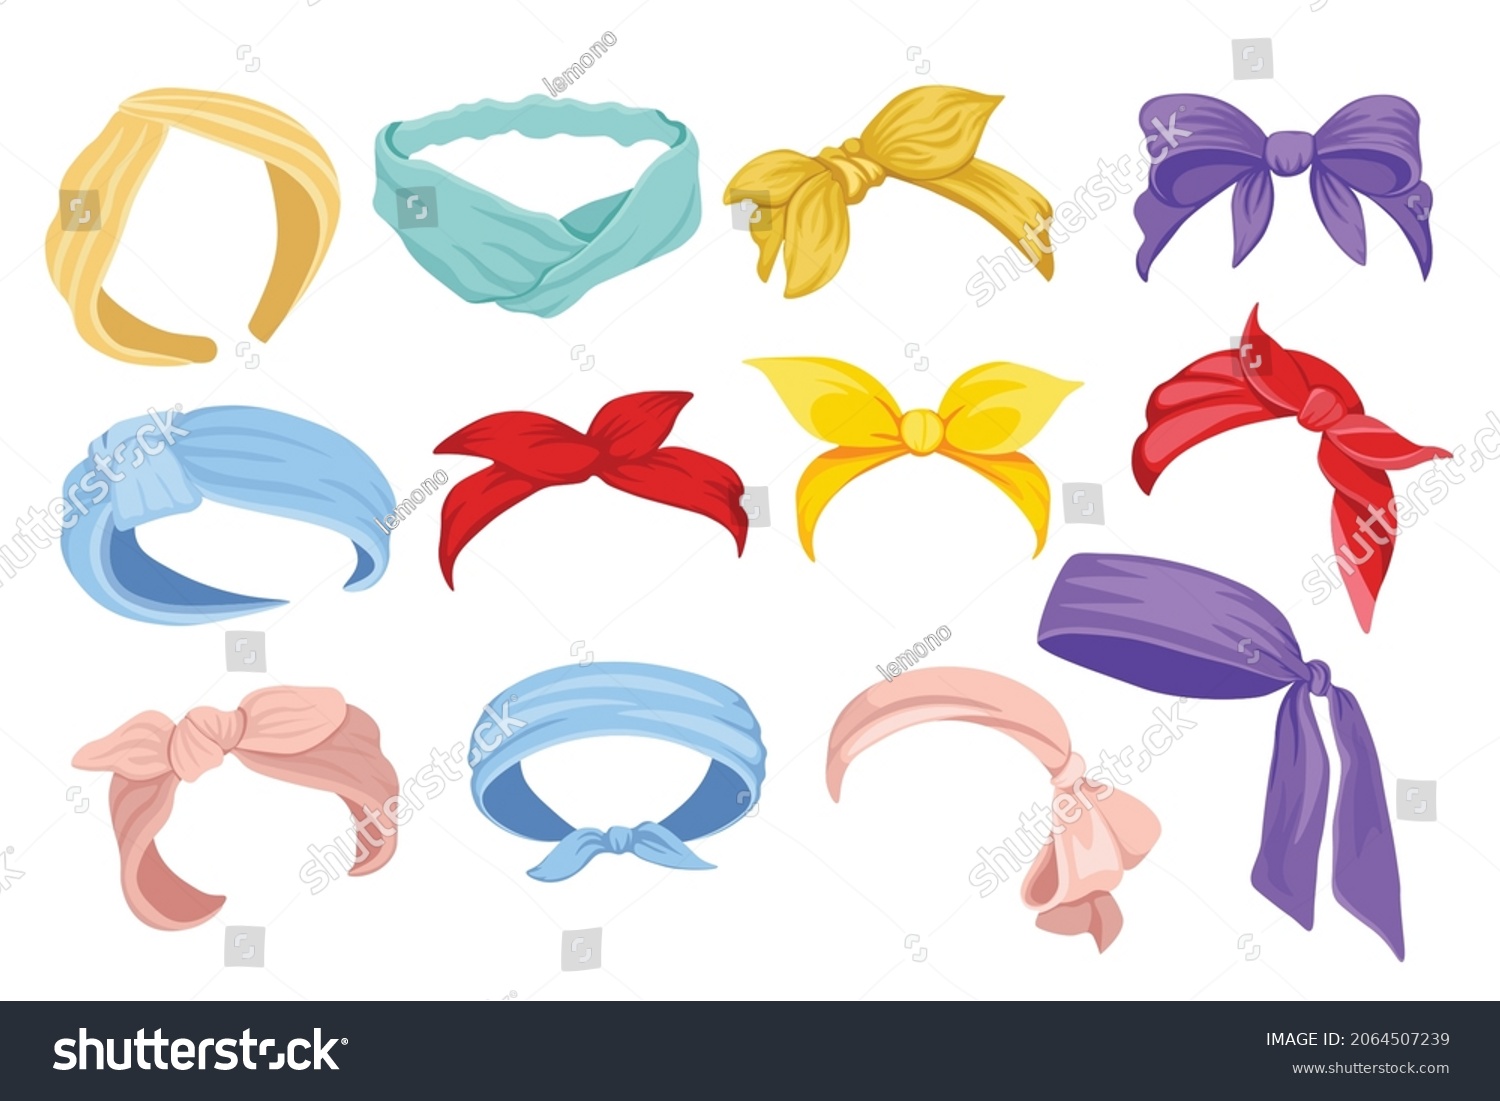 SVG of Set of Woman Bandana, Hair Bands and Scarves. Colorful Retro Headband for Hairstyle. Isolated Hair Dressing, Knotted Vintage Accessories, Feminine Textile Silk Headwear. Cartoon Vector Illustration svg